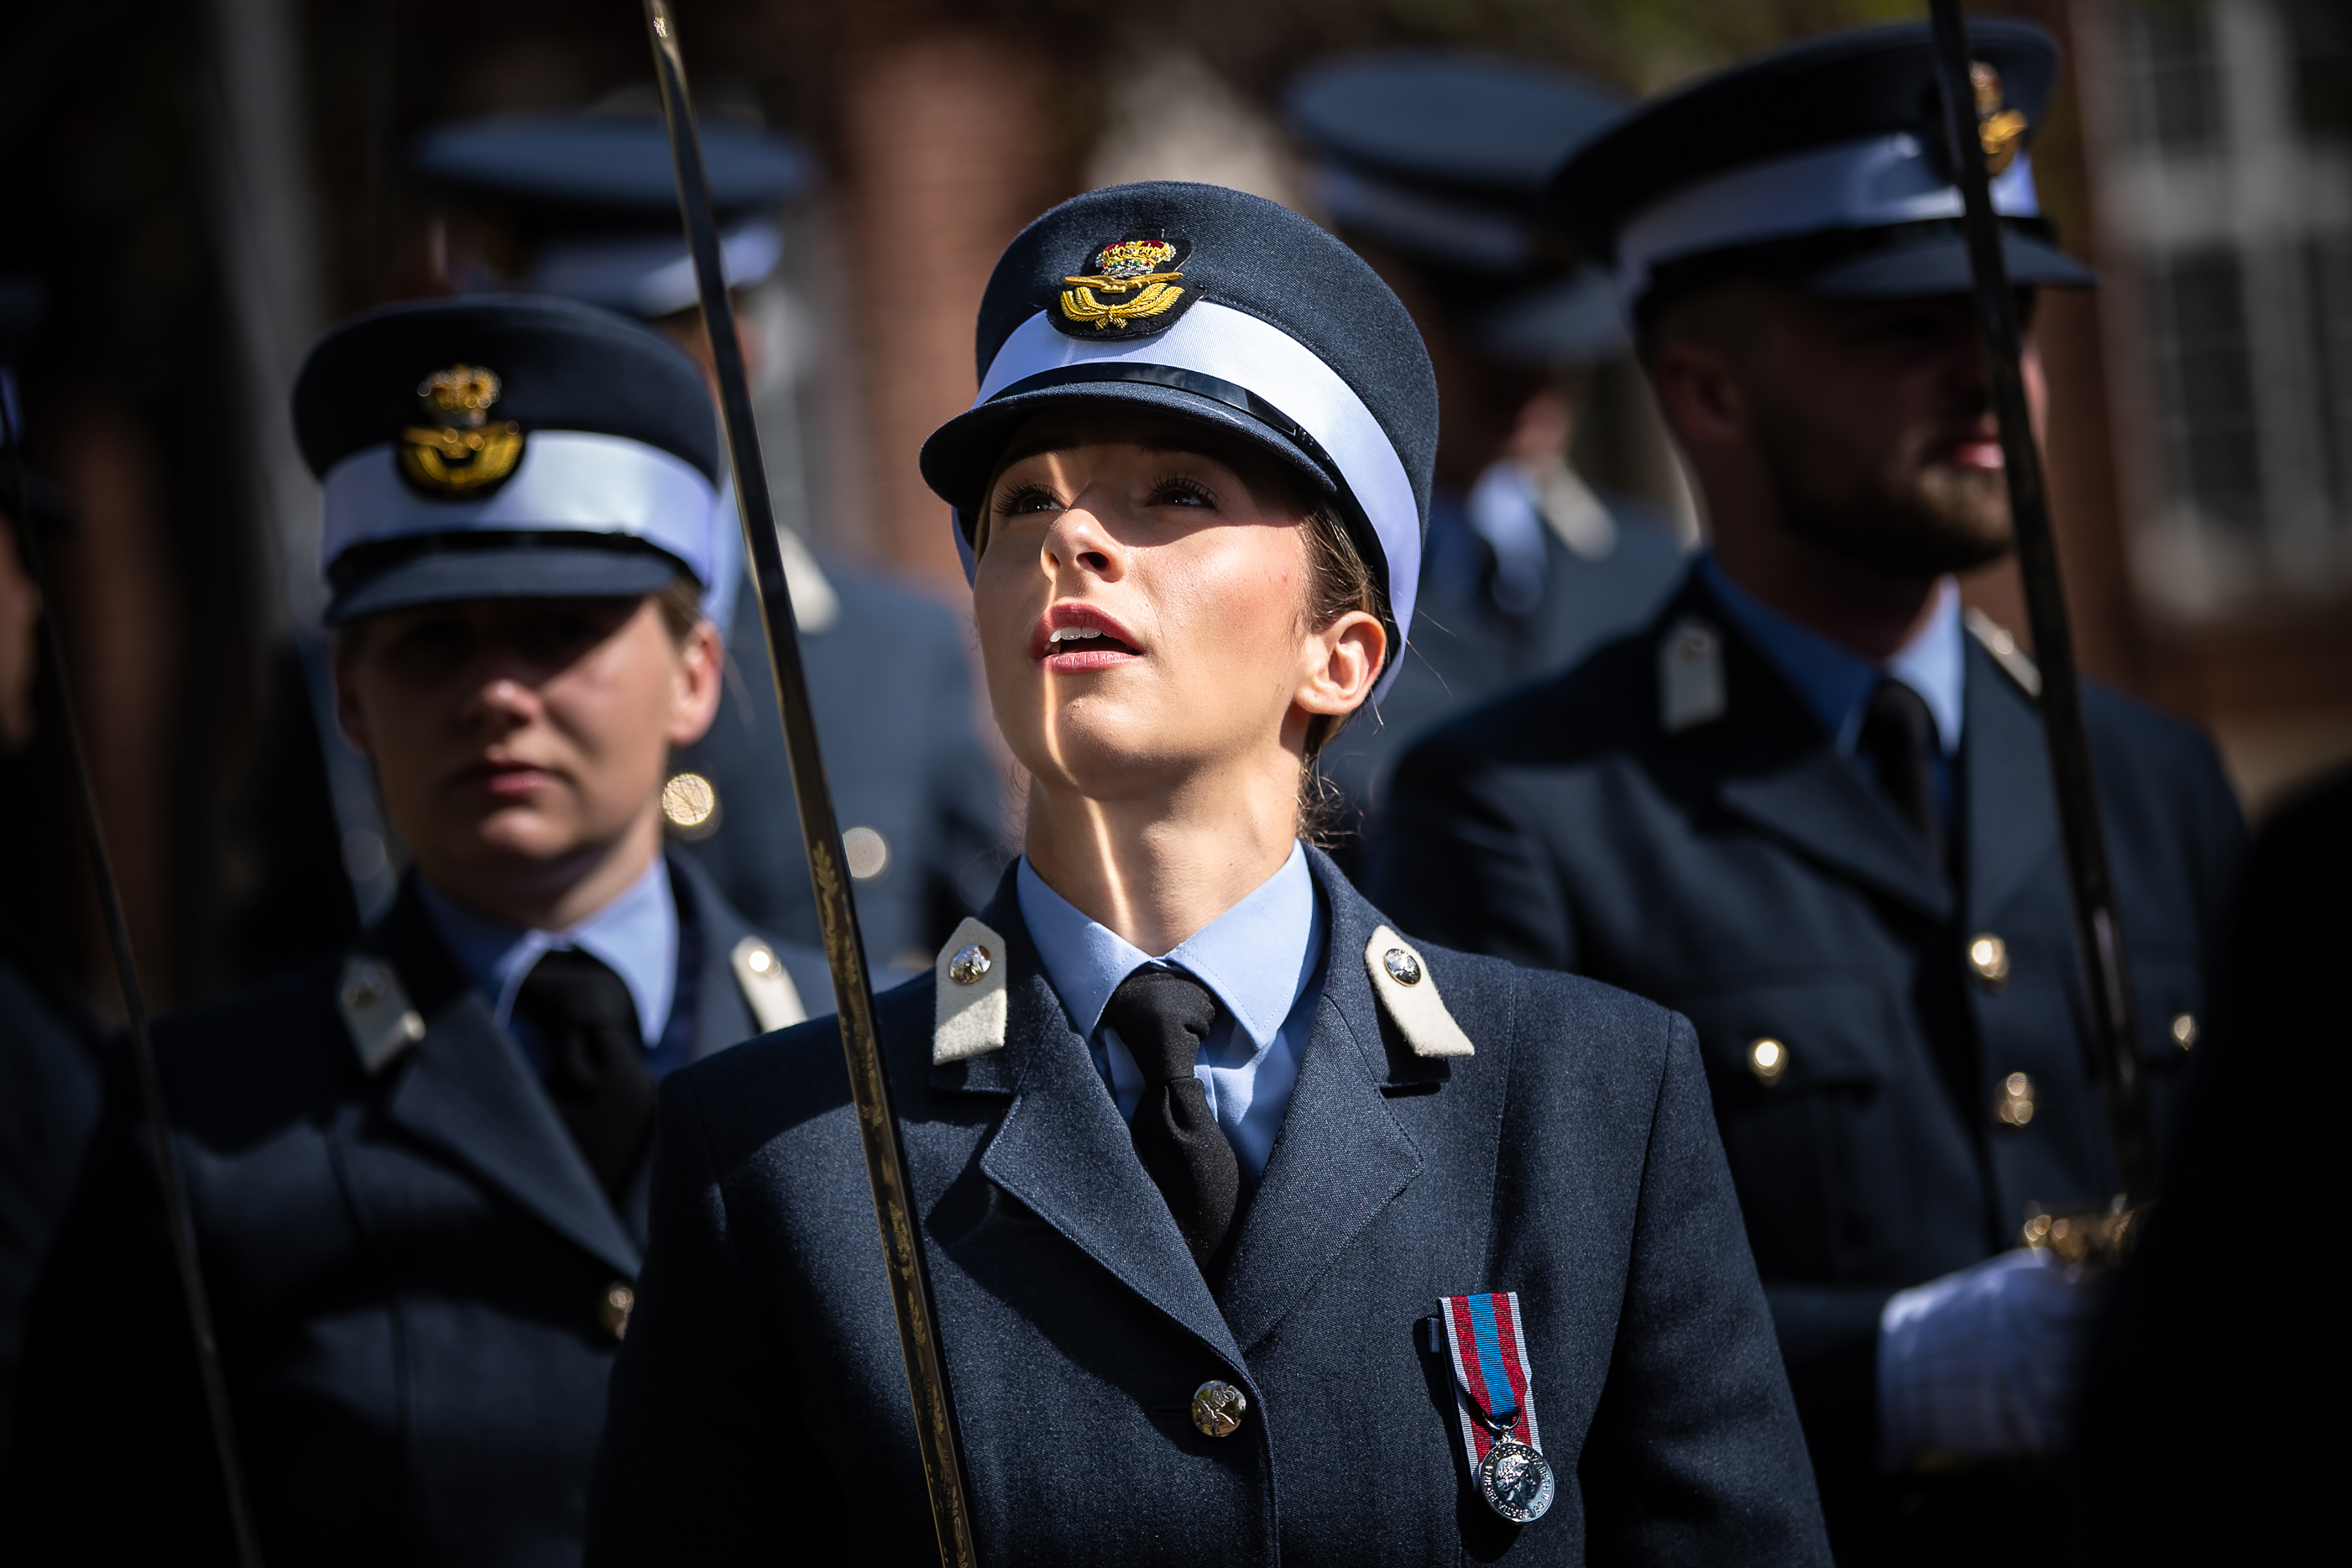 Officer cadet holding their sword up, with it's reflection shining on her face.